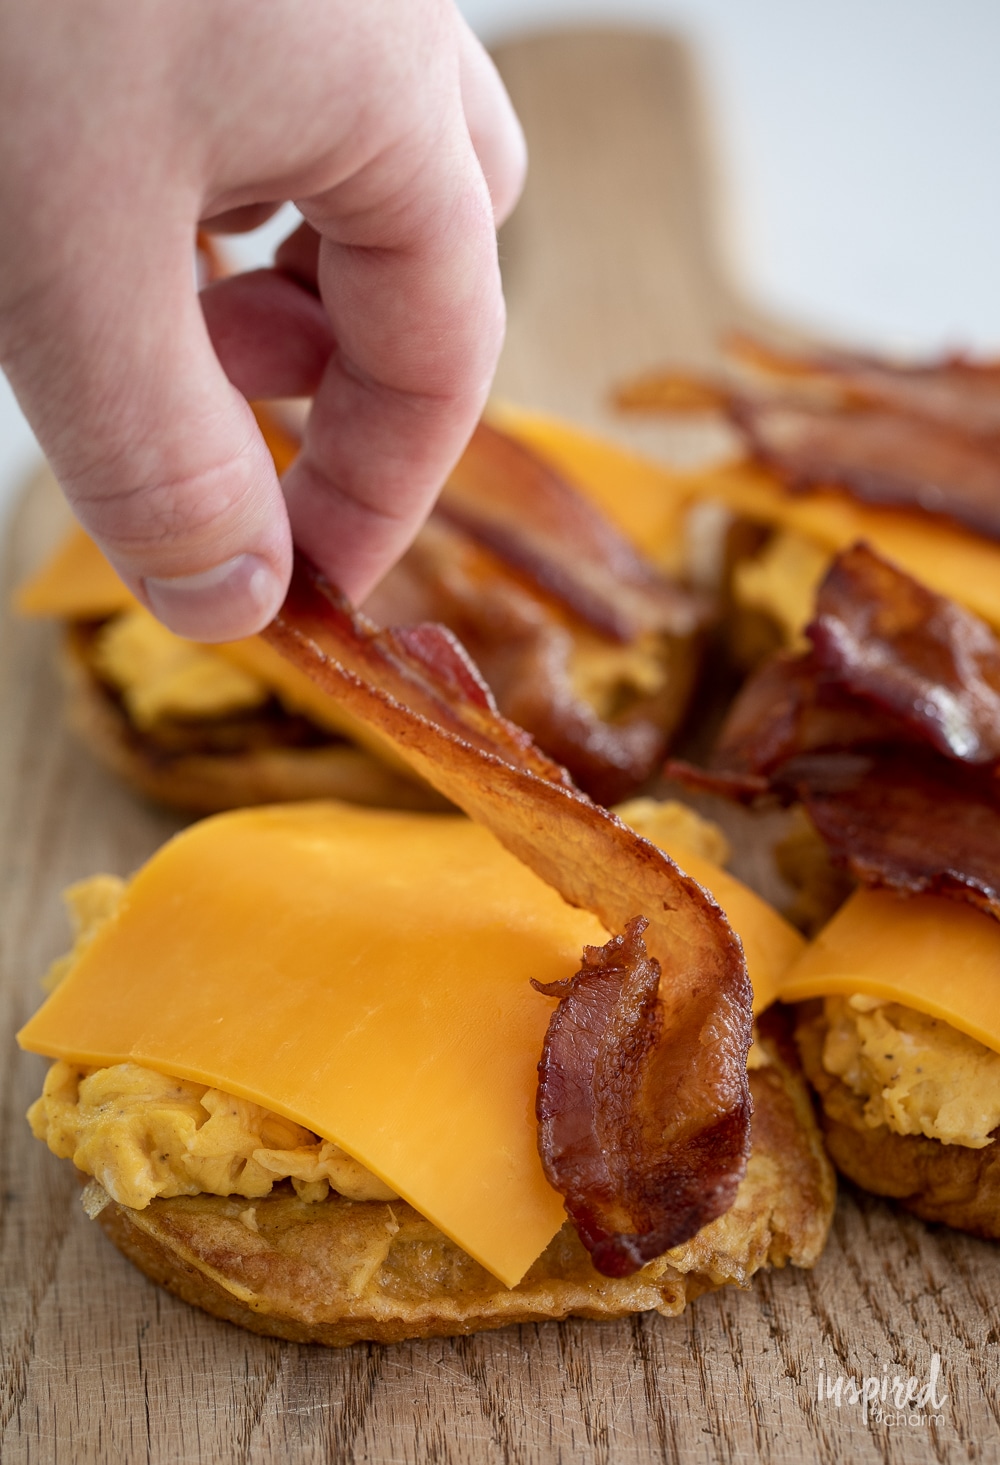 adding bacon to french toast breakfast sandwiches.